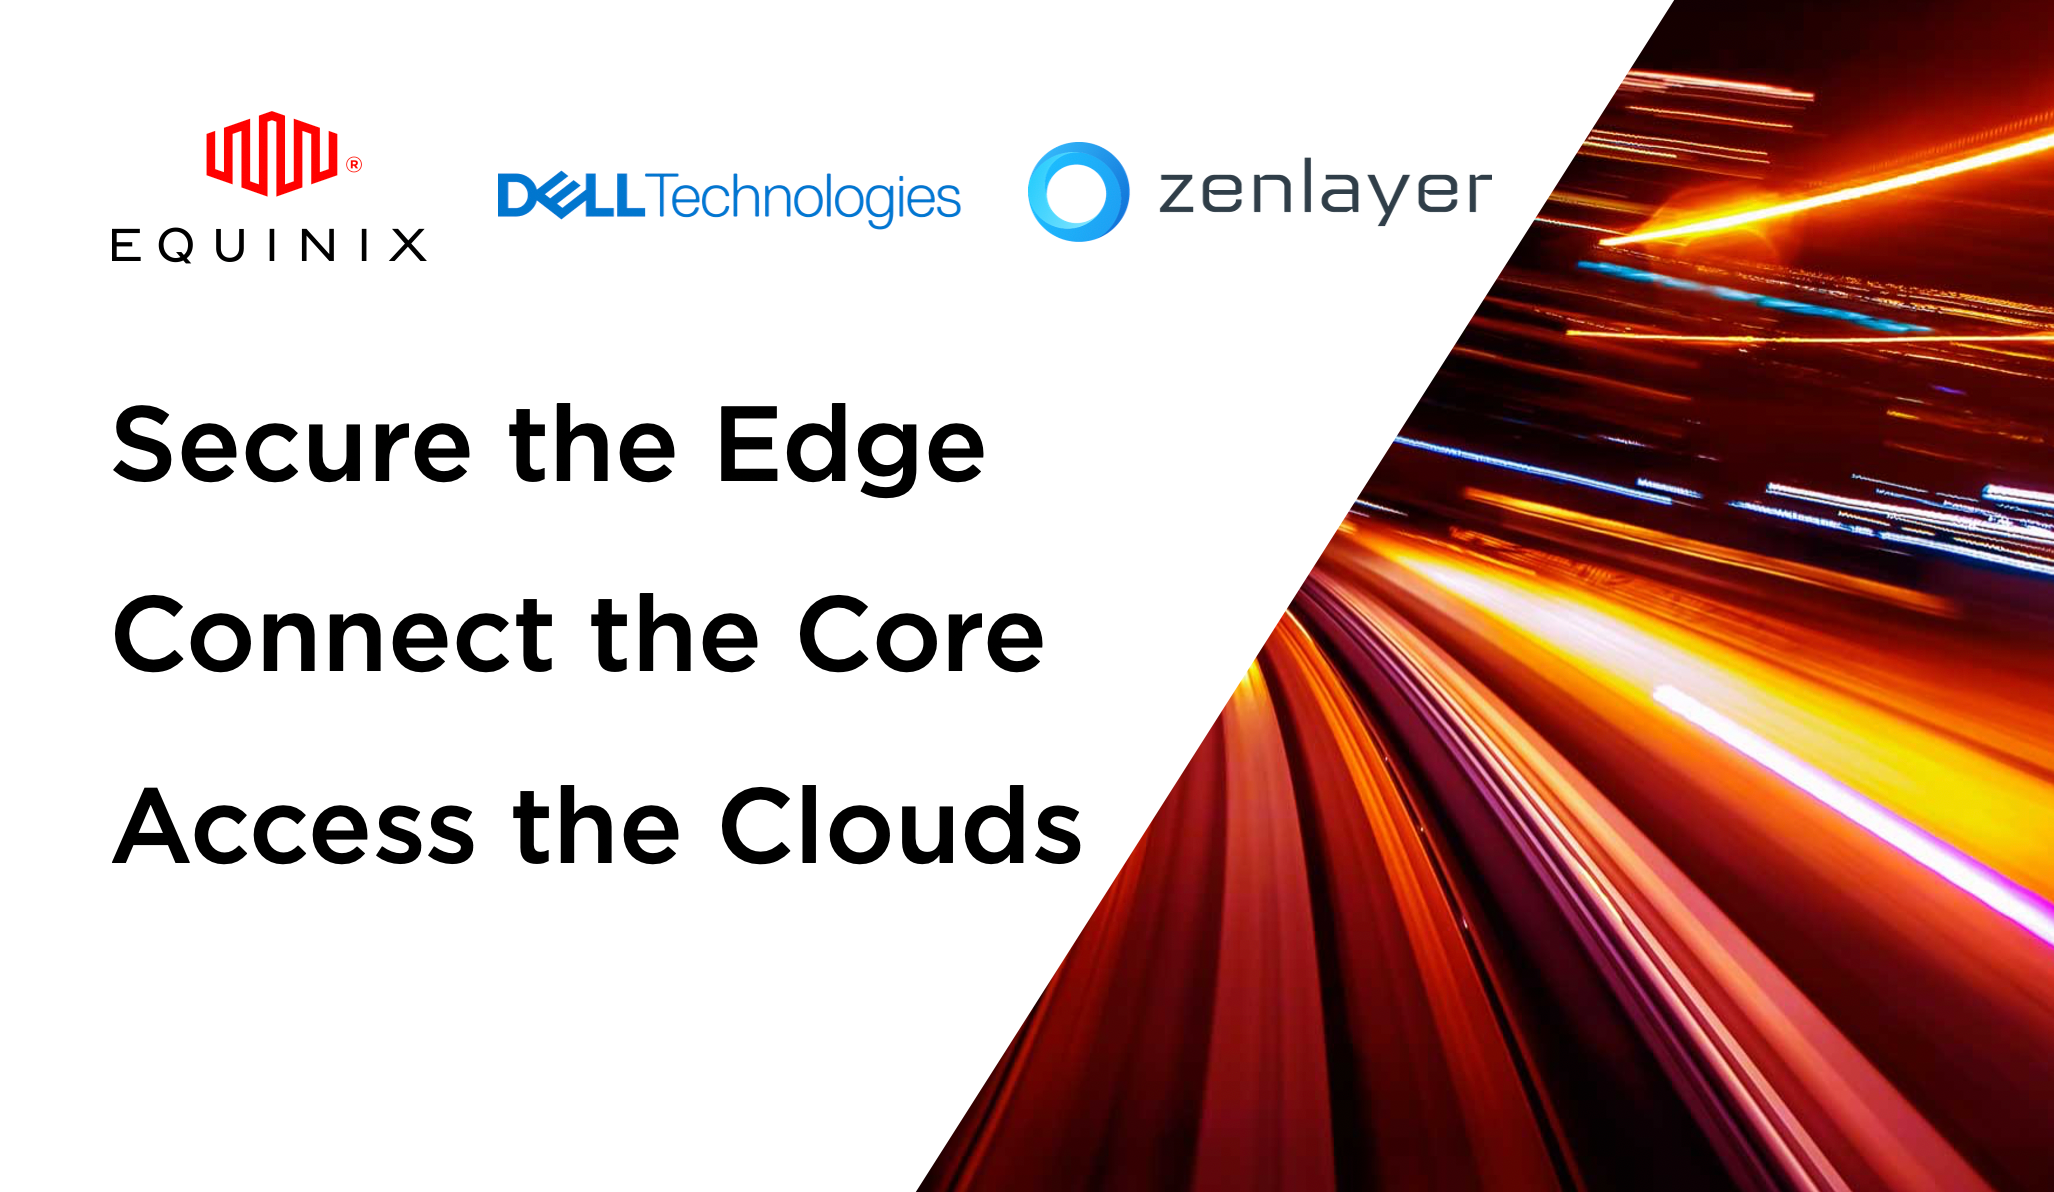 Webcast: Secure the Edge. Connect the Core. Access the Clouds.